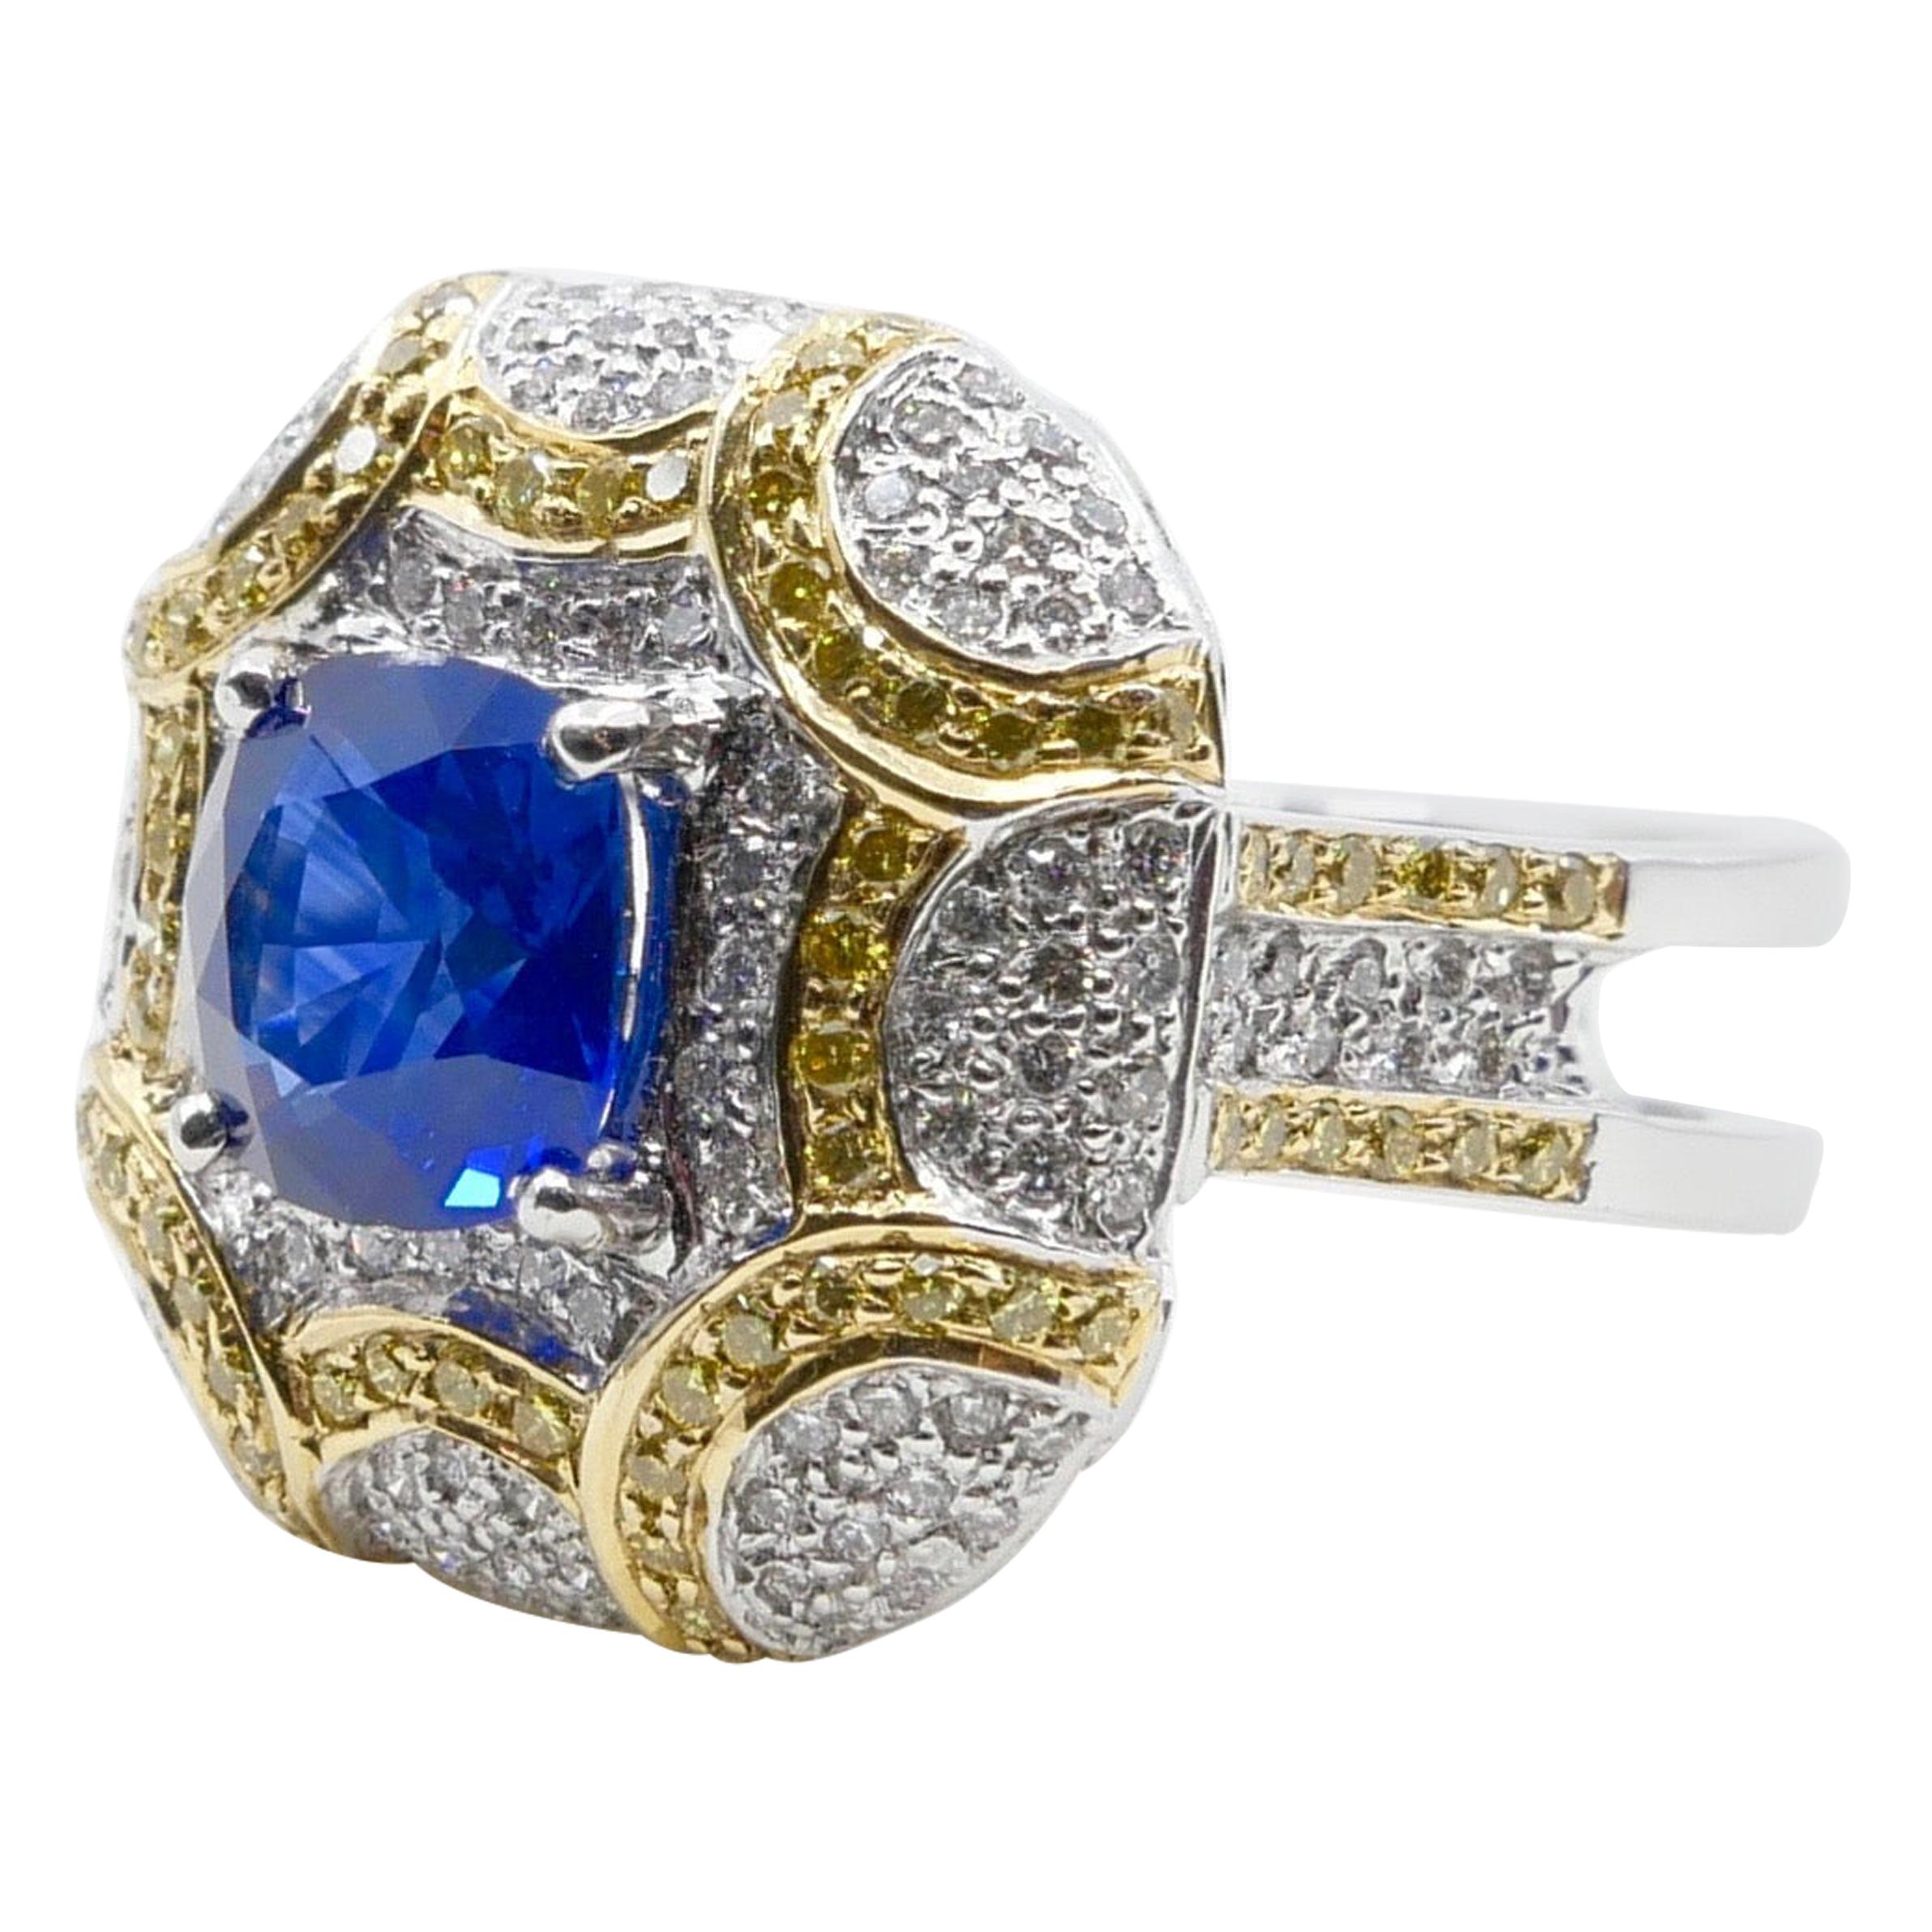 ICA Certified 1.74Cts Ceylon Heat Sapphire Ring, White and Fancy Yellow Diamonds For Sale